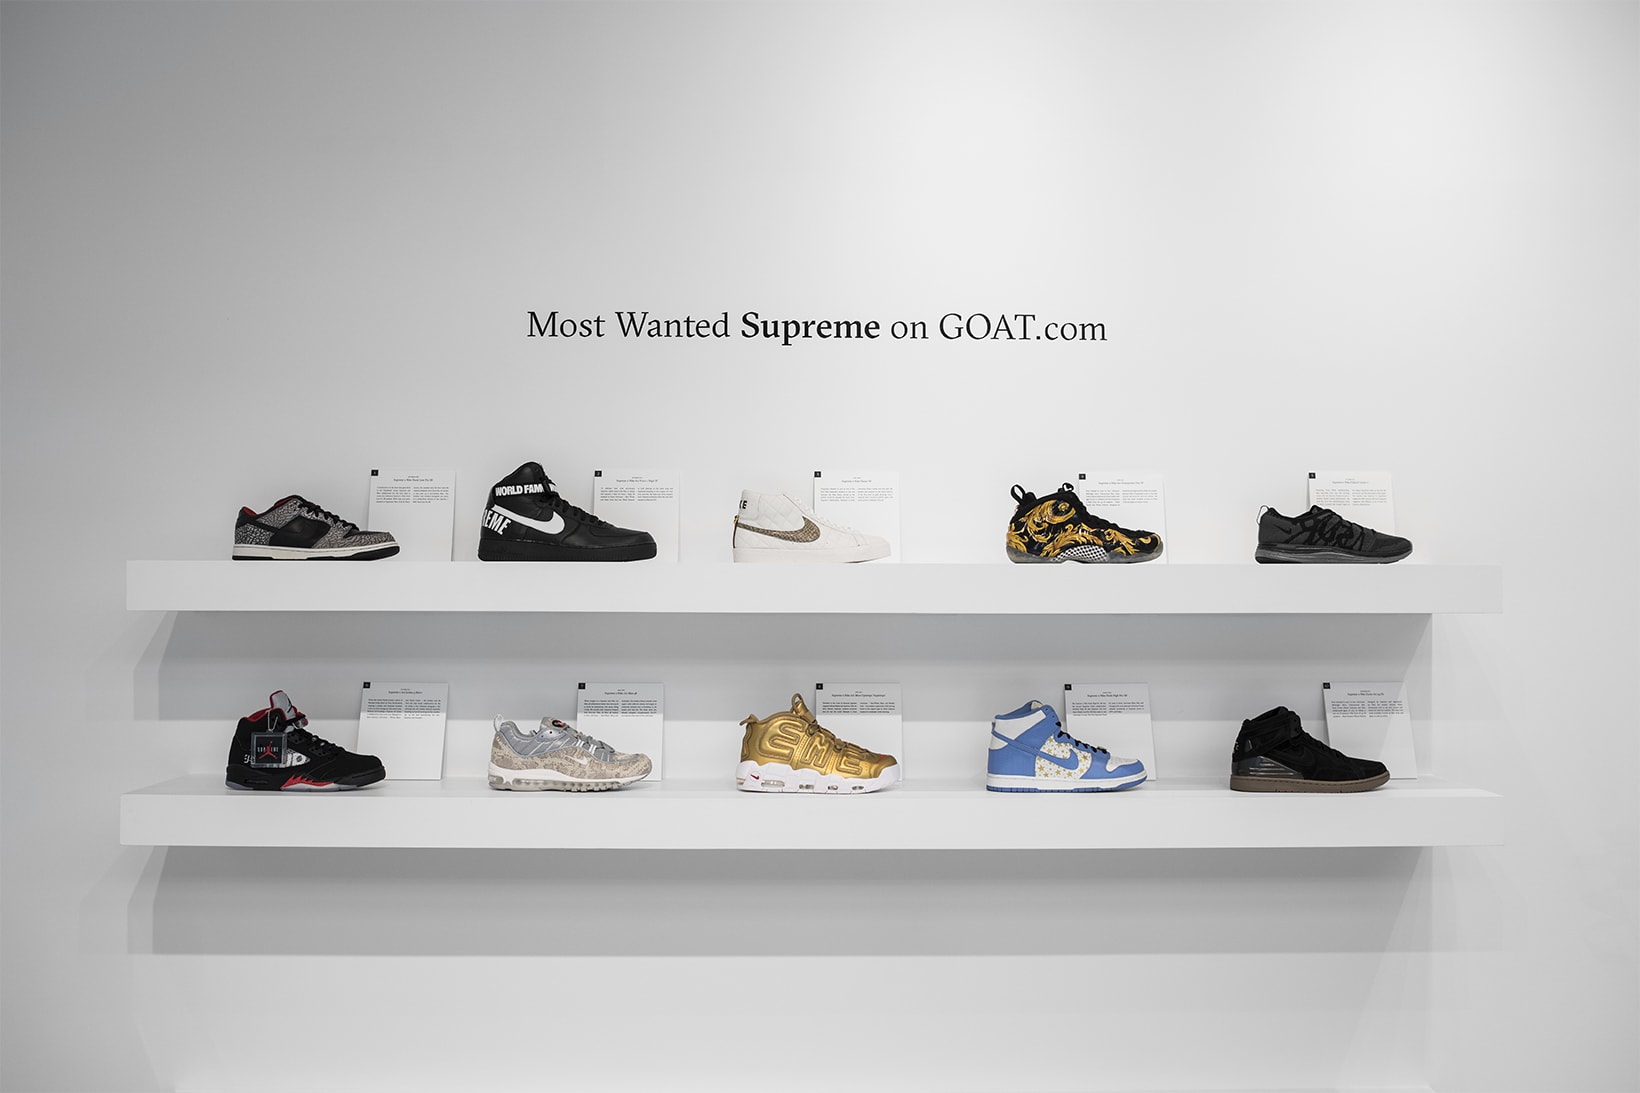 GOAT New York Themed Sneaker Exhibit Pop Up Culver City Supreme Staple Nike Collaboration Shoe Drop The Greatest